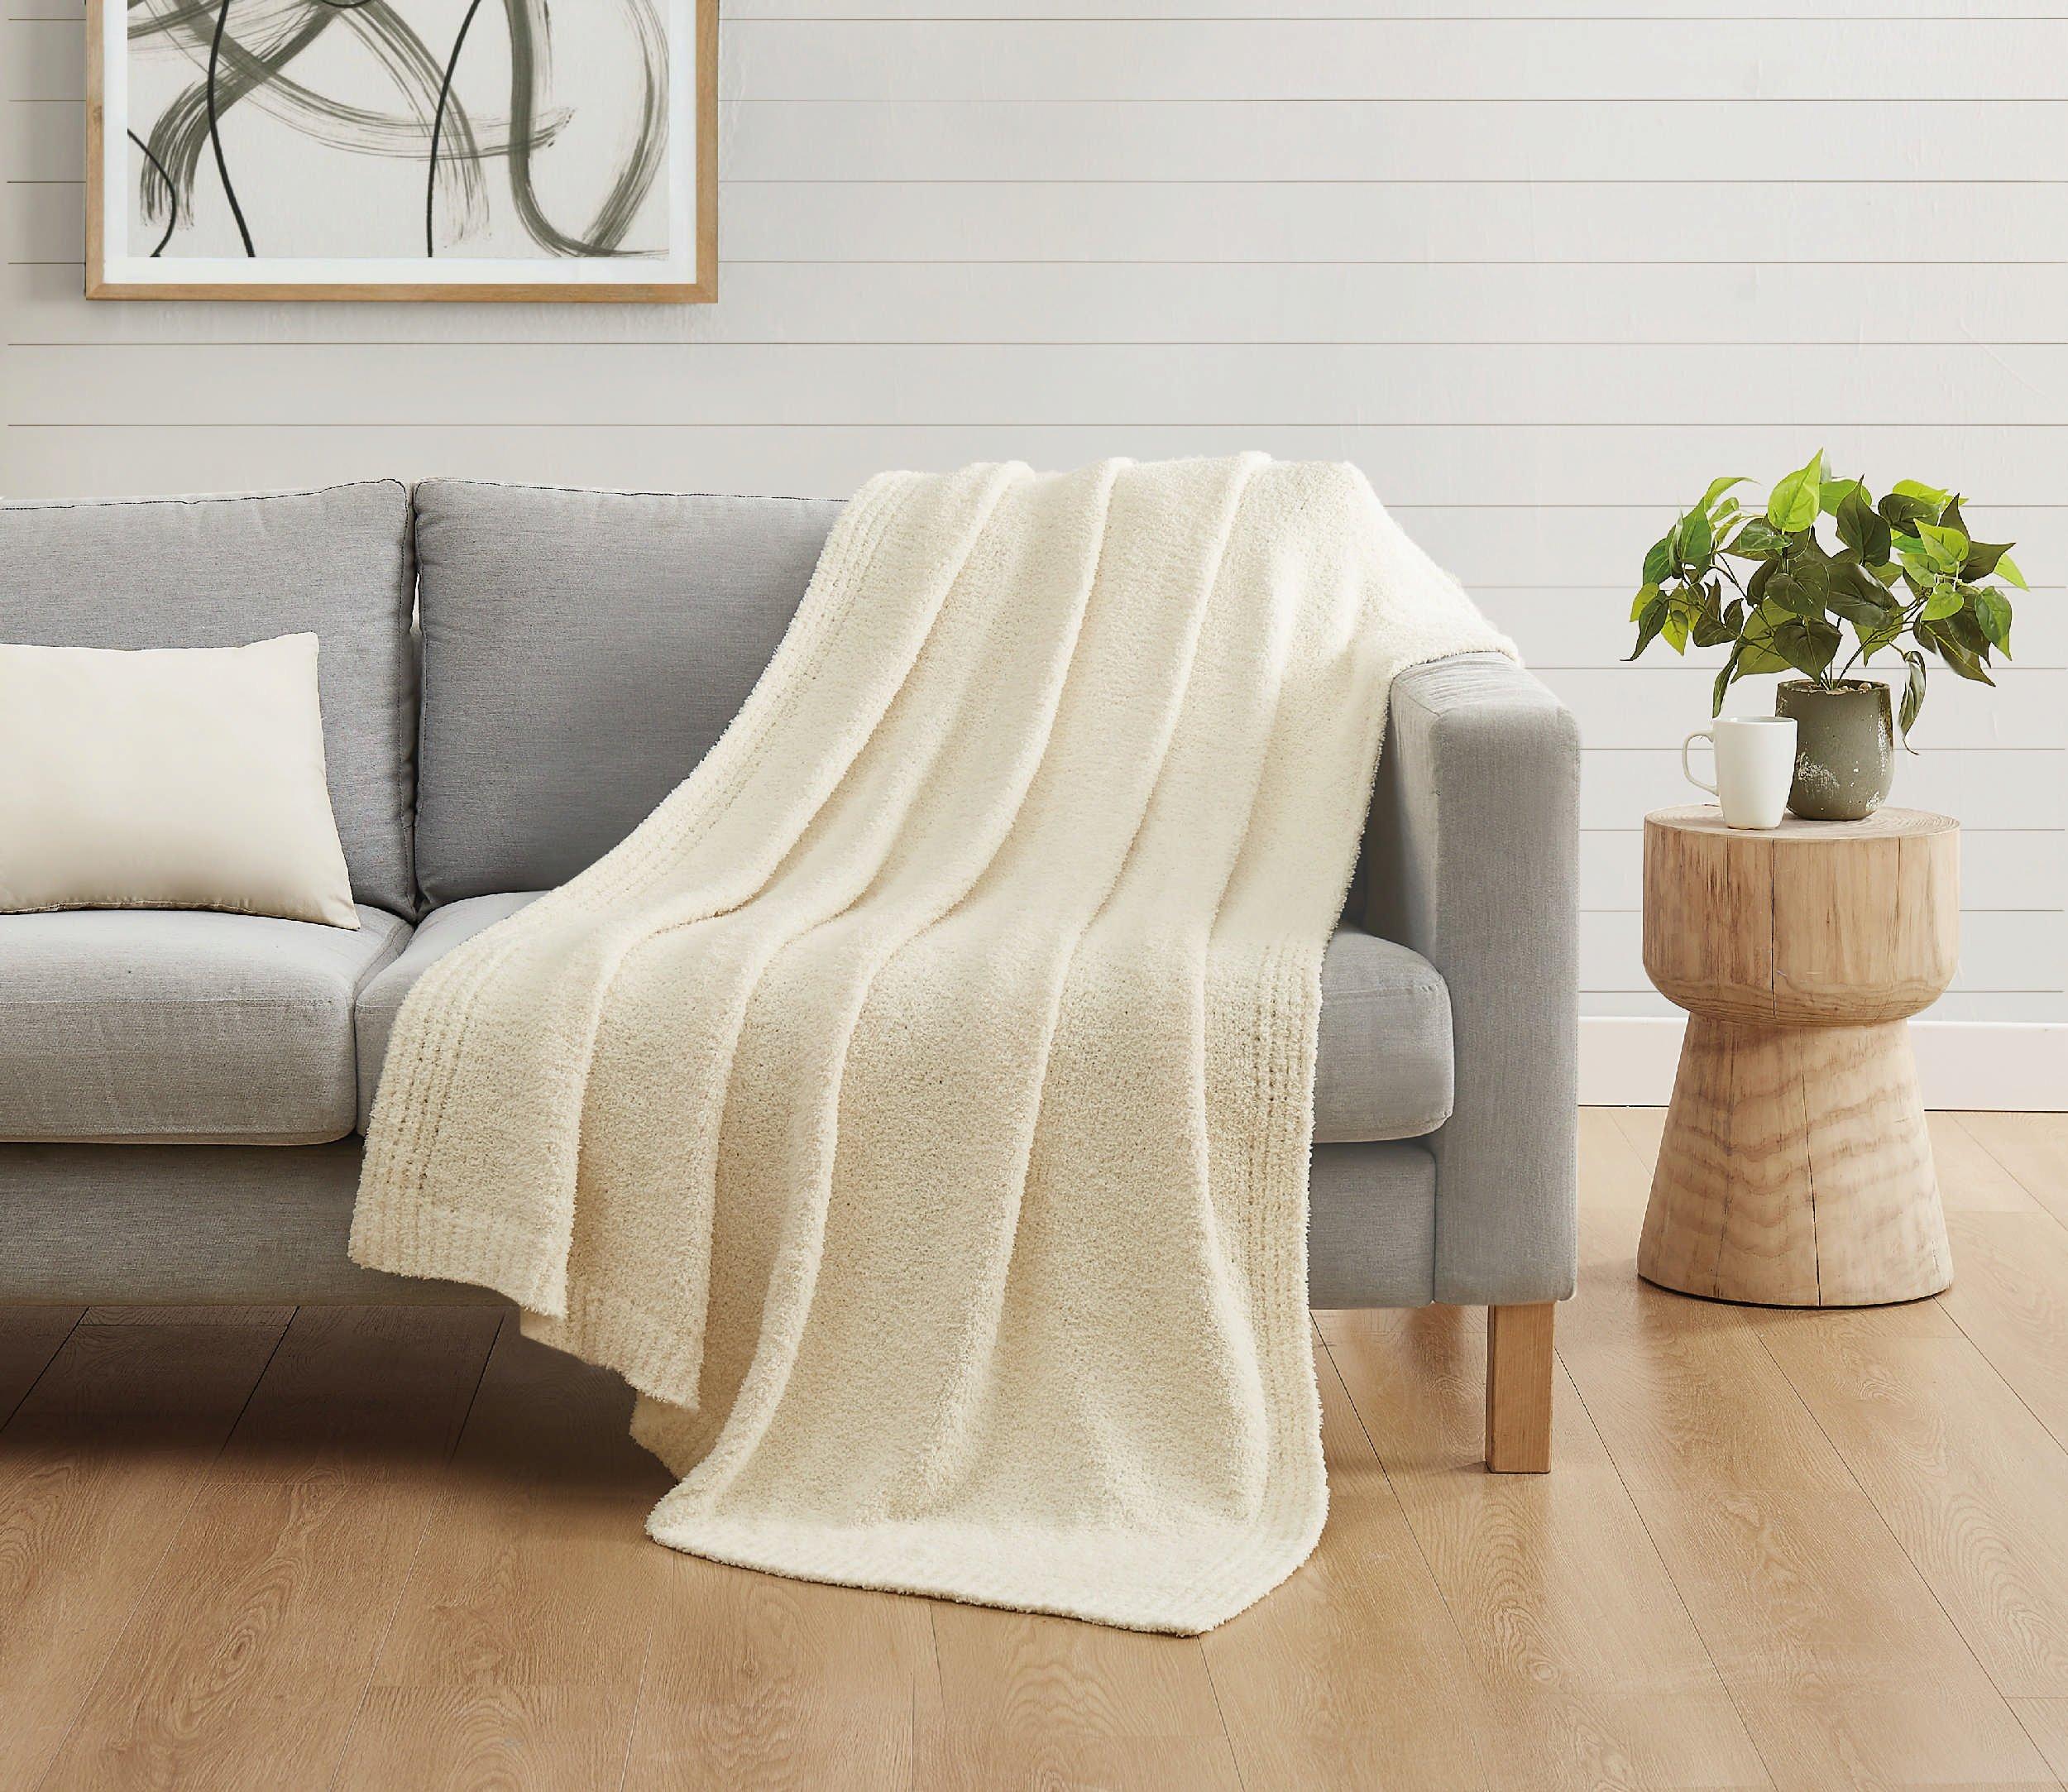 Photos - Other interior and decor Truly Soft Cozy Knit Throw Blanket